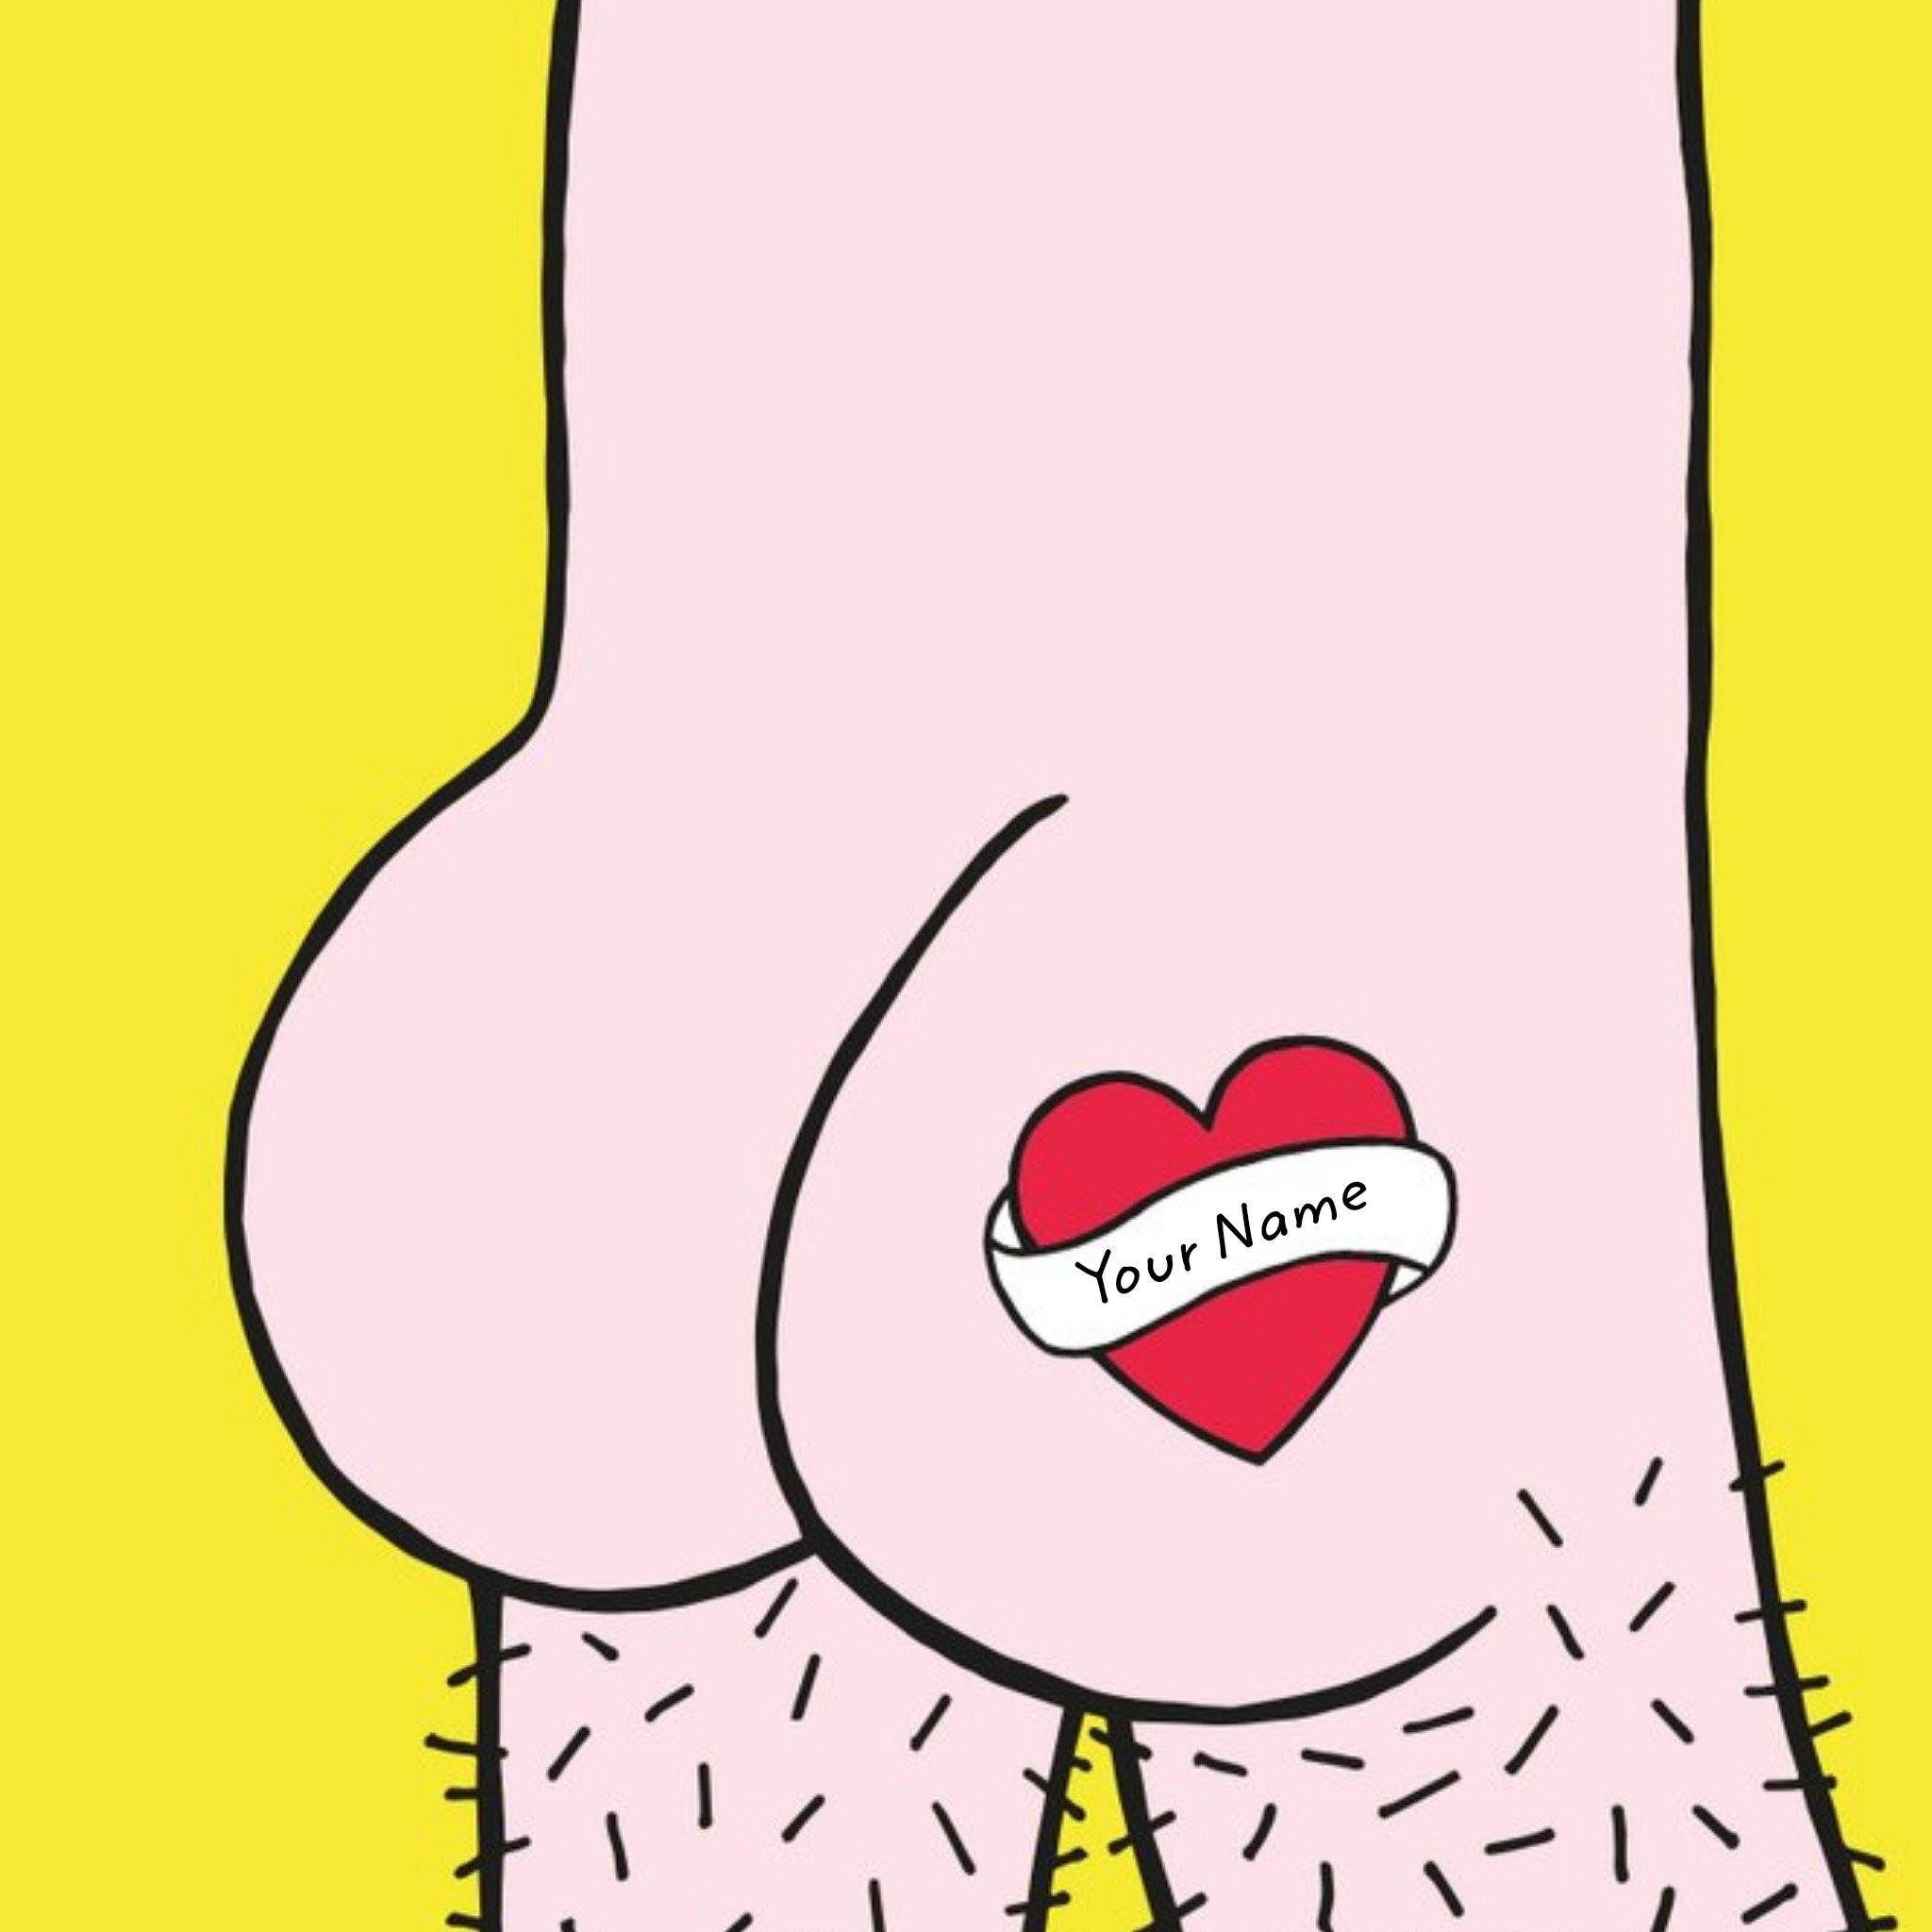 Moonpig Anniversary Card - Valentine's Card - Your Name Tattoo - Bum - Naughty, Square